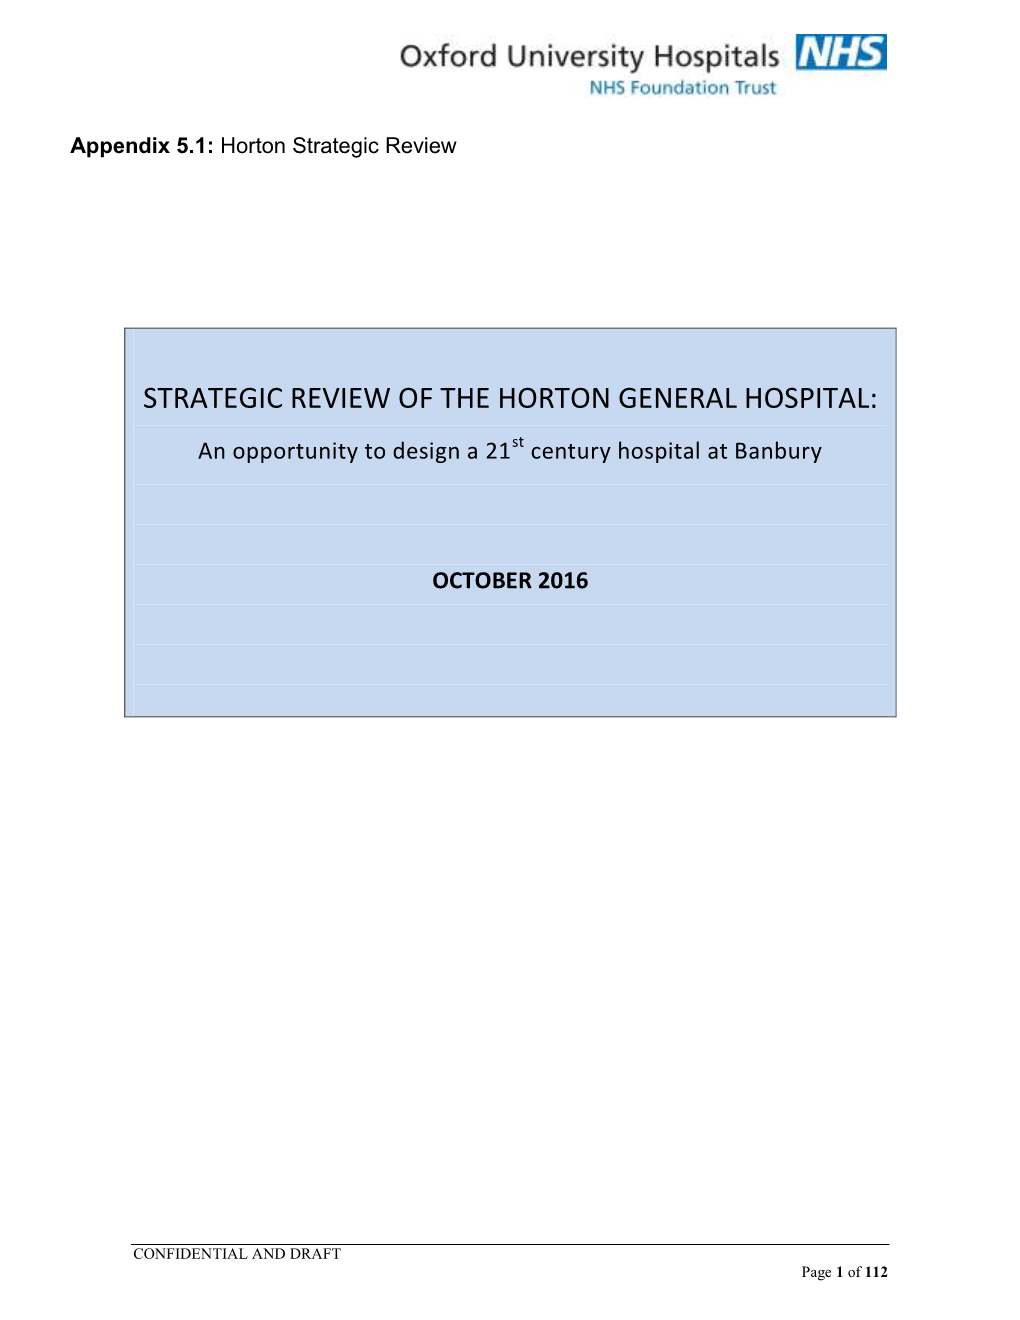 STRATEGIC REVIEW of the HORTON GENERAL HOSPITAL: an Opportunity to Design a 21 St Century Hospital at Banbury